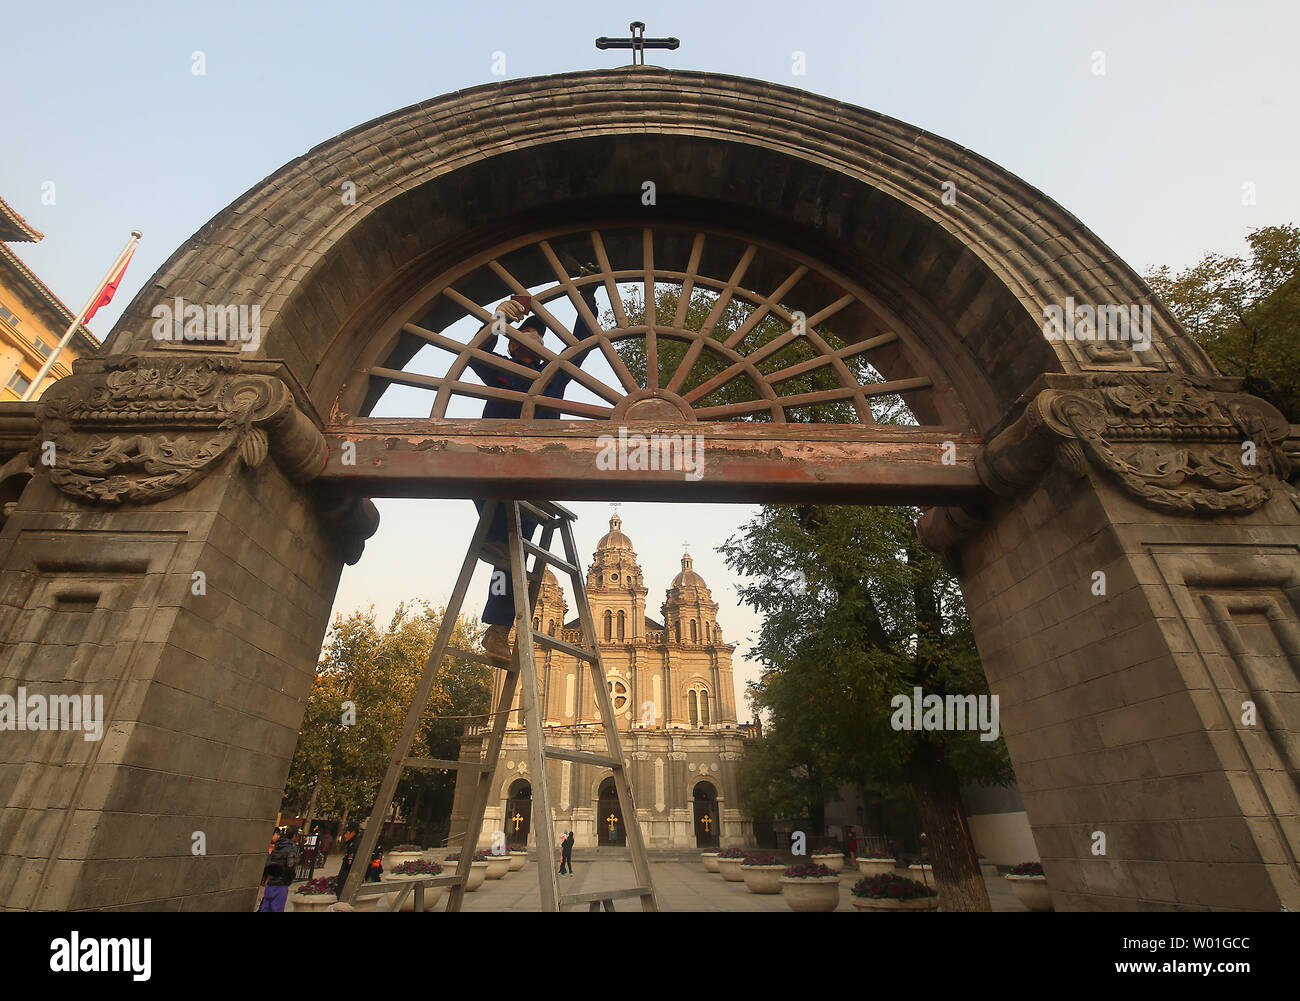 A Chinese worker climbs a ladder to peel off old paint on a gate in front of St. Joseph's Church, one of the oldest Catholic churches still open, in central Beijing on November 19, 2018.  The church has been destroyed twice in the past due to prior governments' anti-Western sentiments and policies, but was opened recently for religious services.     Photo by Stephen Shaver/UPI Stock Photo